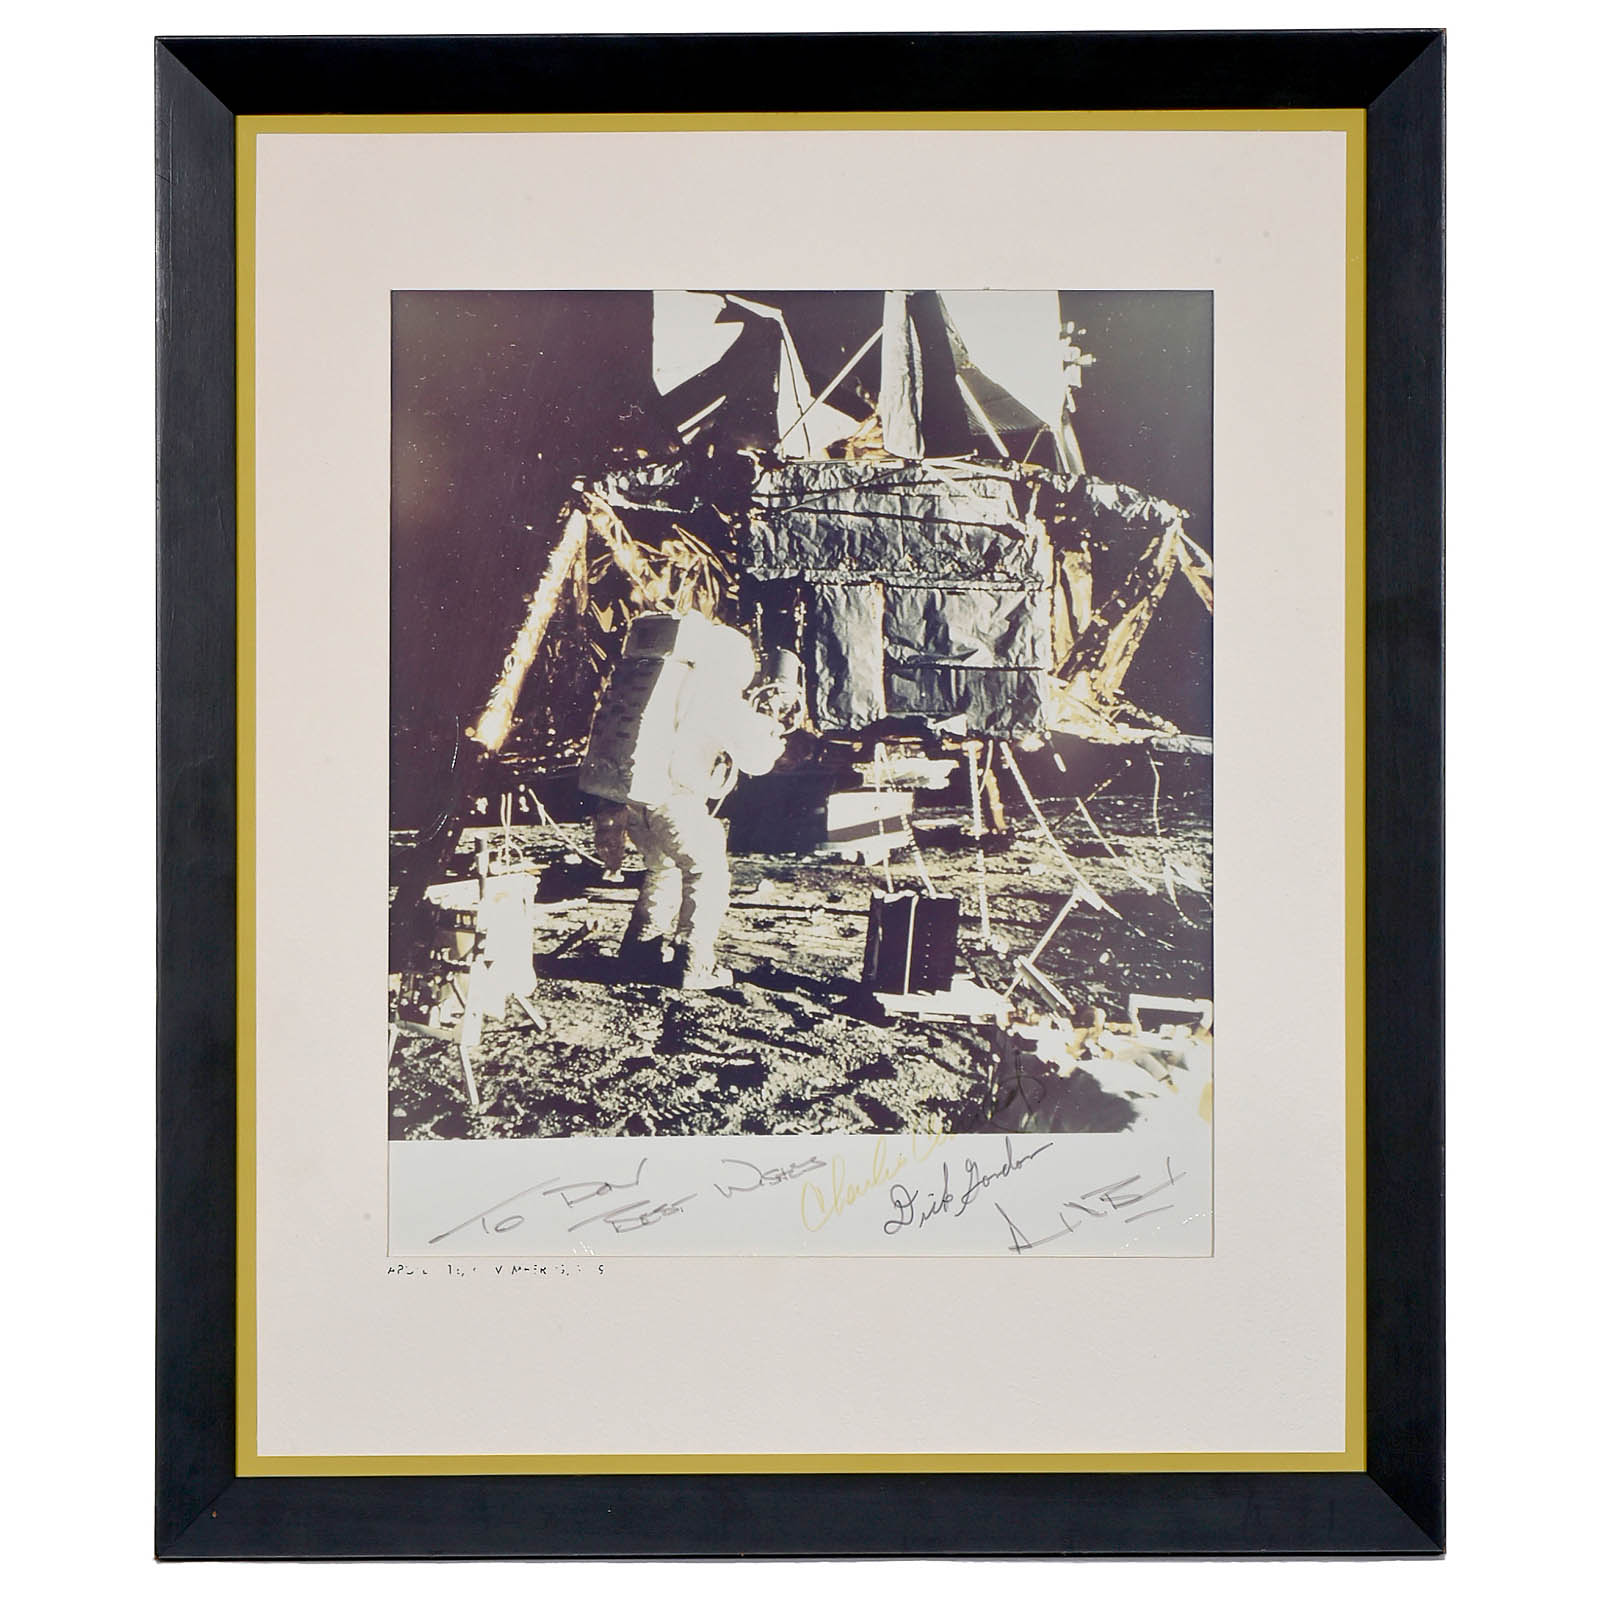 Signed Color Image: "Apollo 12, the Second Manned Mission to the Moon", 1969 onwards
Lunar module